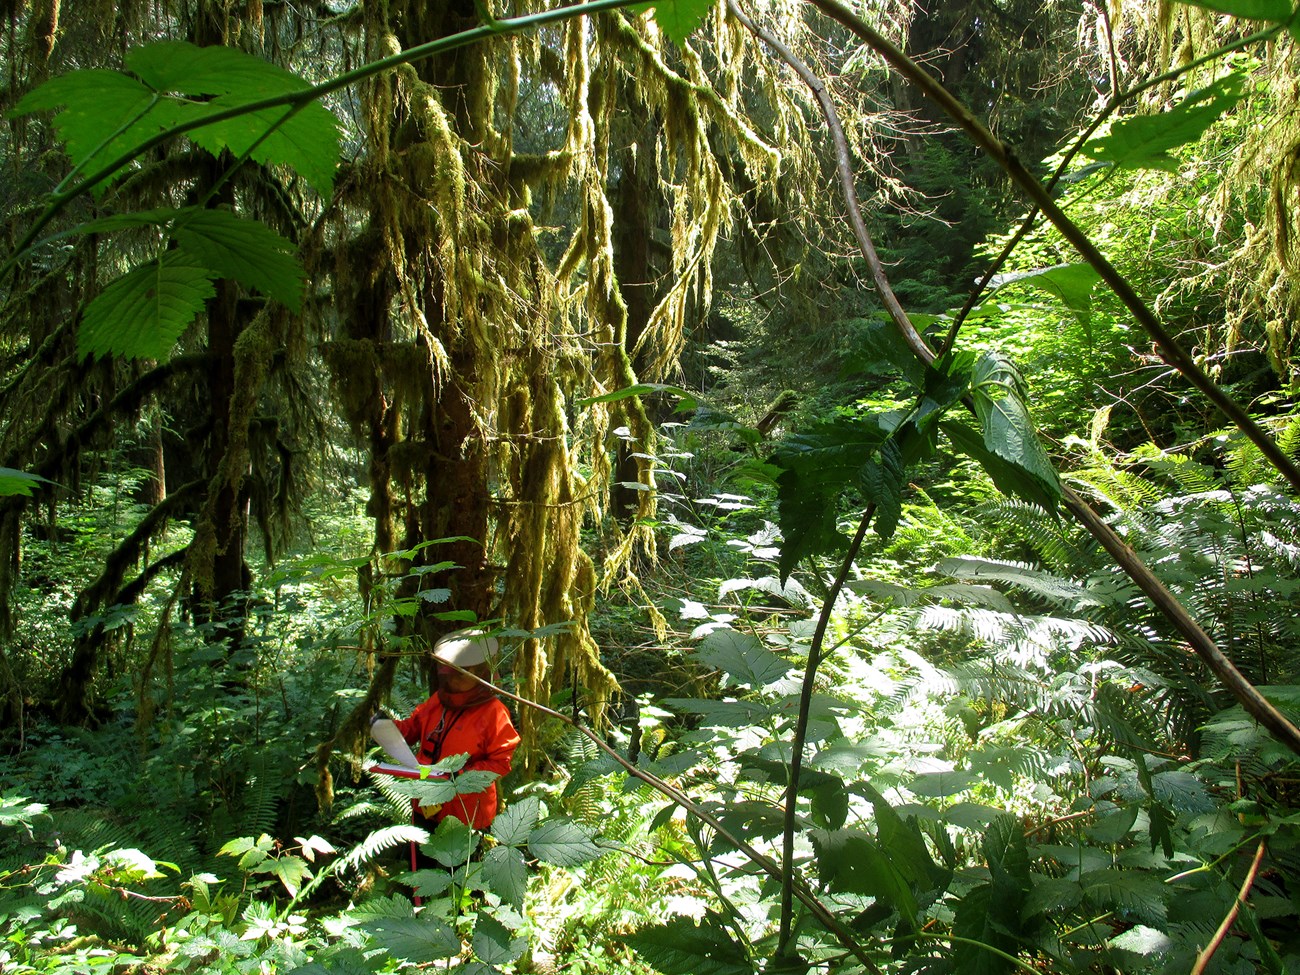 A person in a red suit with a white head cover collects information while standing in a densely vegetated green forest